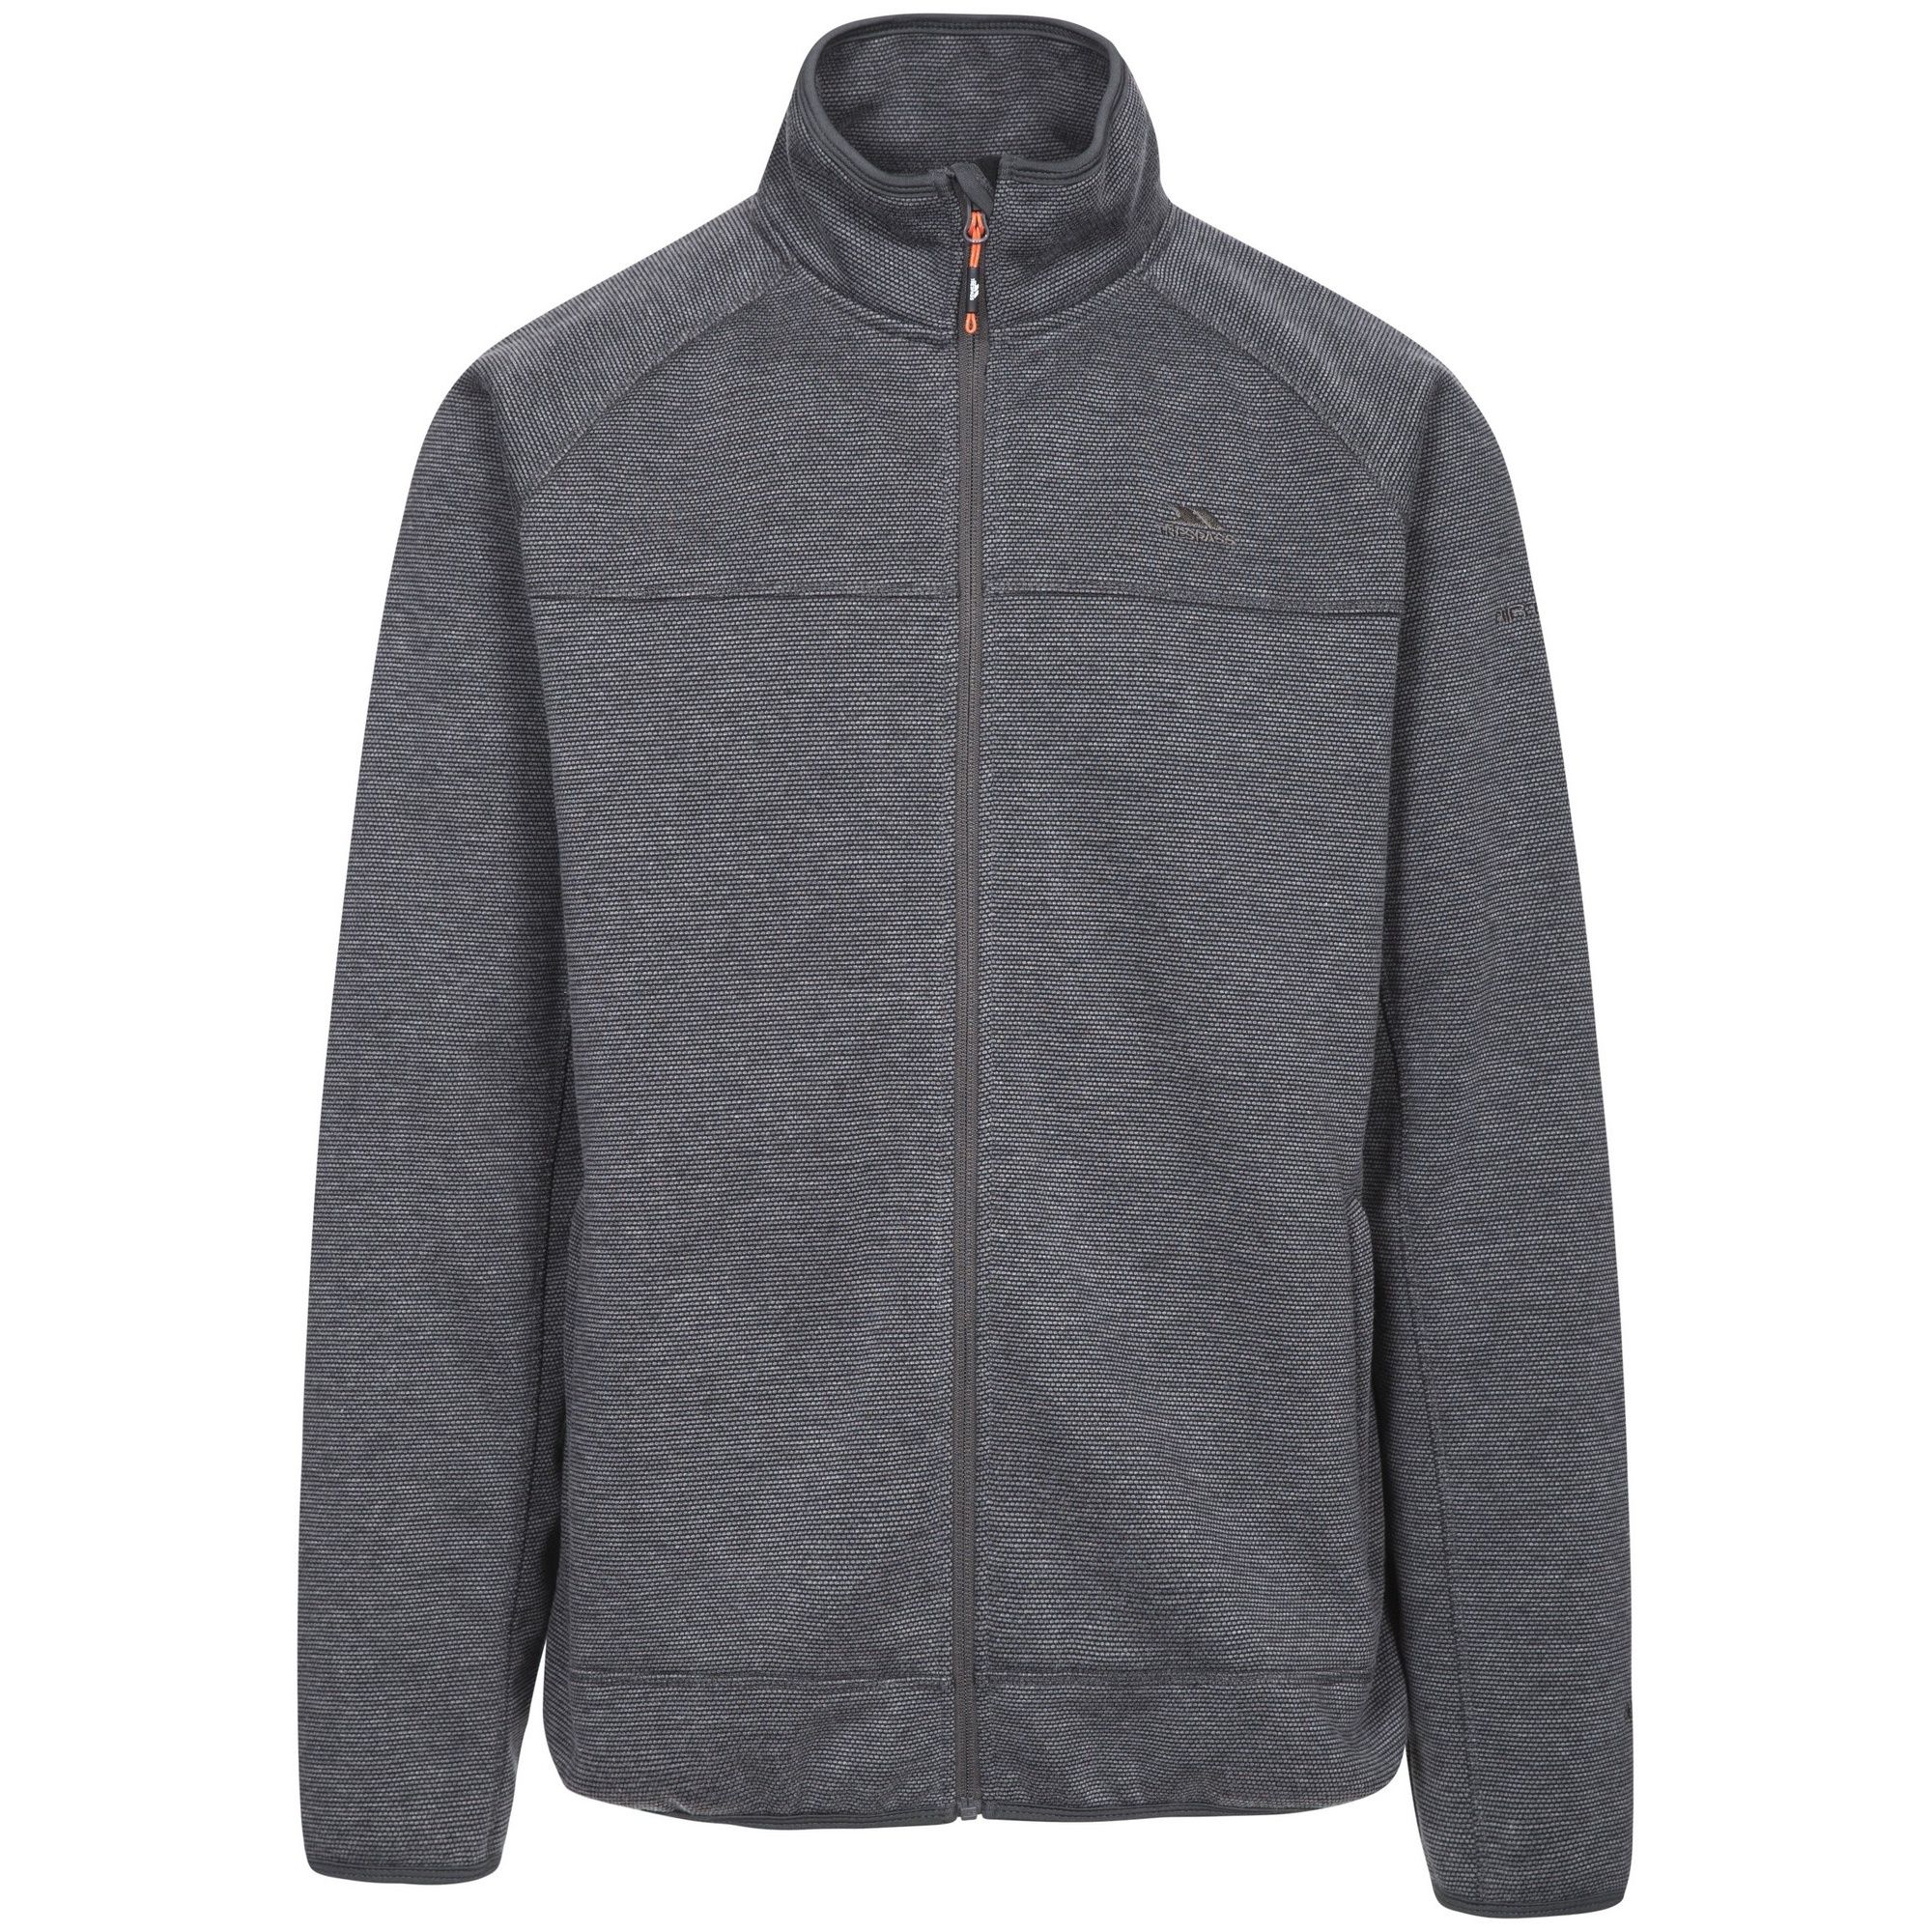 Mens patterned bonded fleece. Coverstitch detail. 2 zip pockets. Stretch binding at cuffs and hem. 100% polyester.